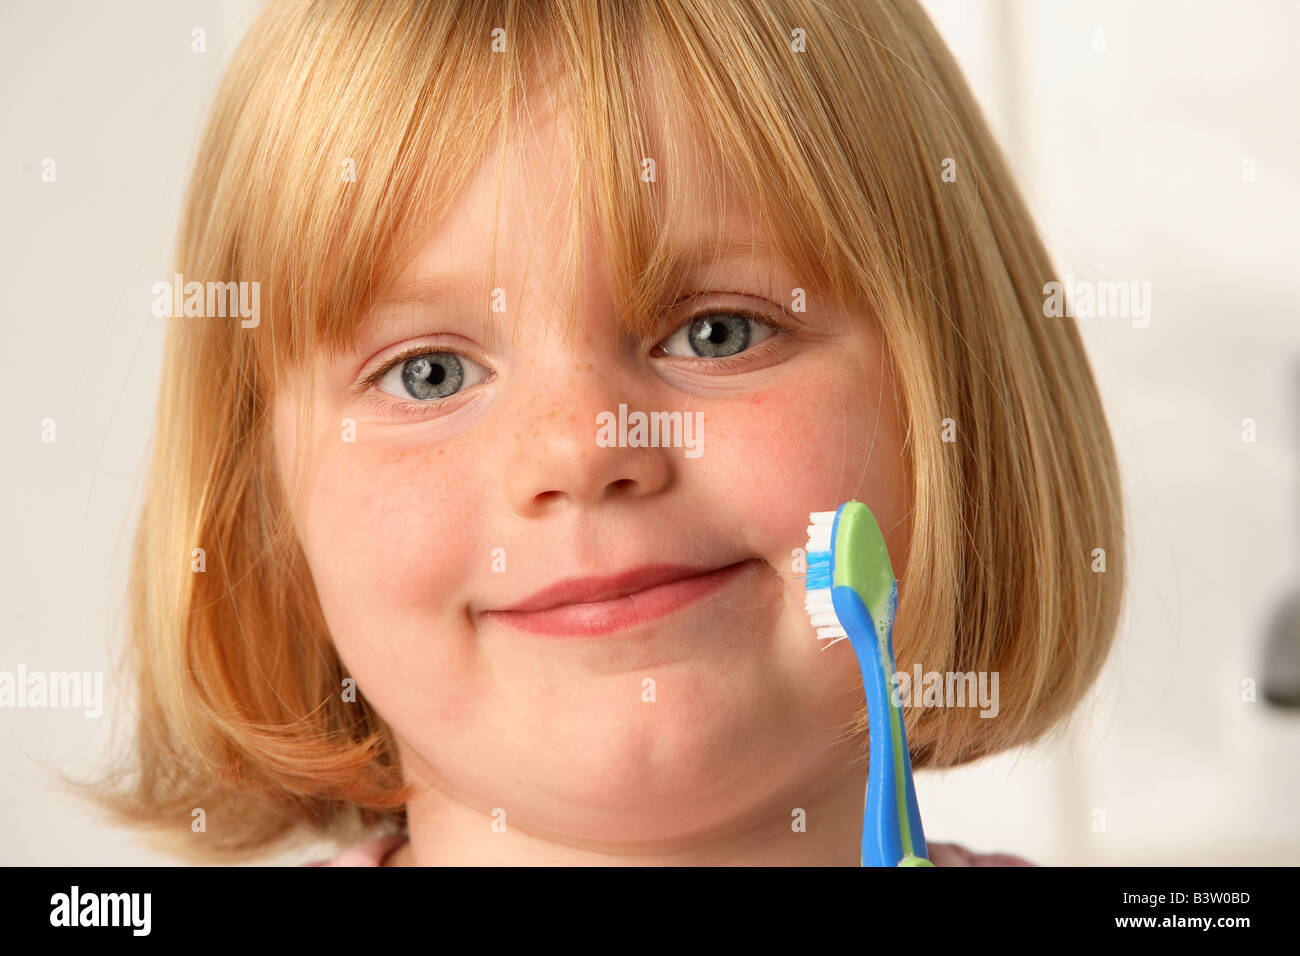 A young girl holding a toothbrush Stock Photo